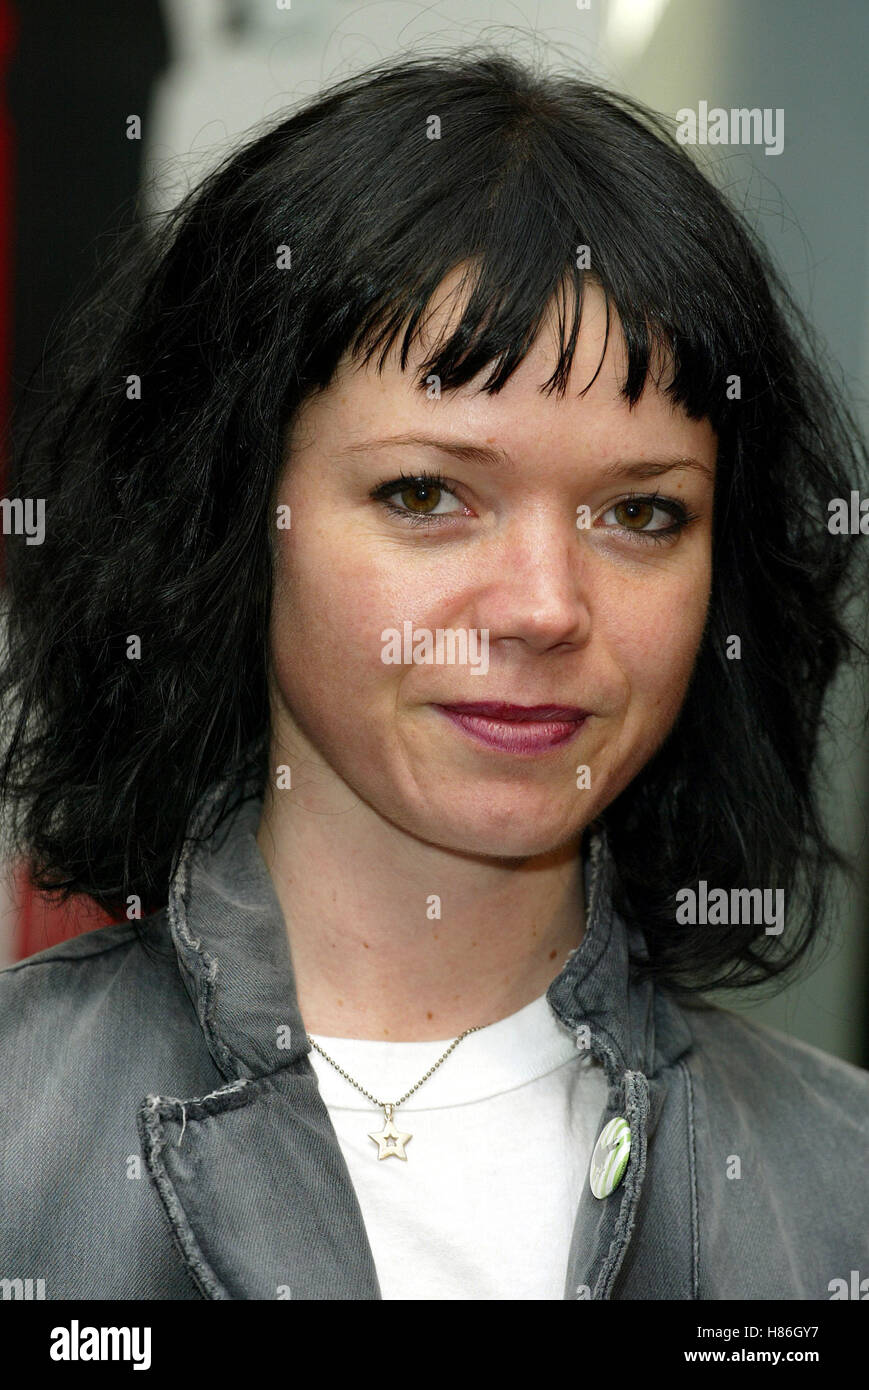 SHELLY COLE CONFESSIONS OF A DANGEROUS MIND PREMIERE WESTWOOD LOS ANGELES USA 11. Dezember 2002 Stockfoto